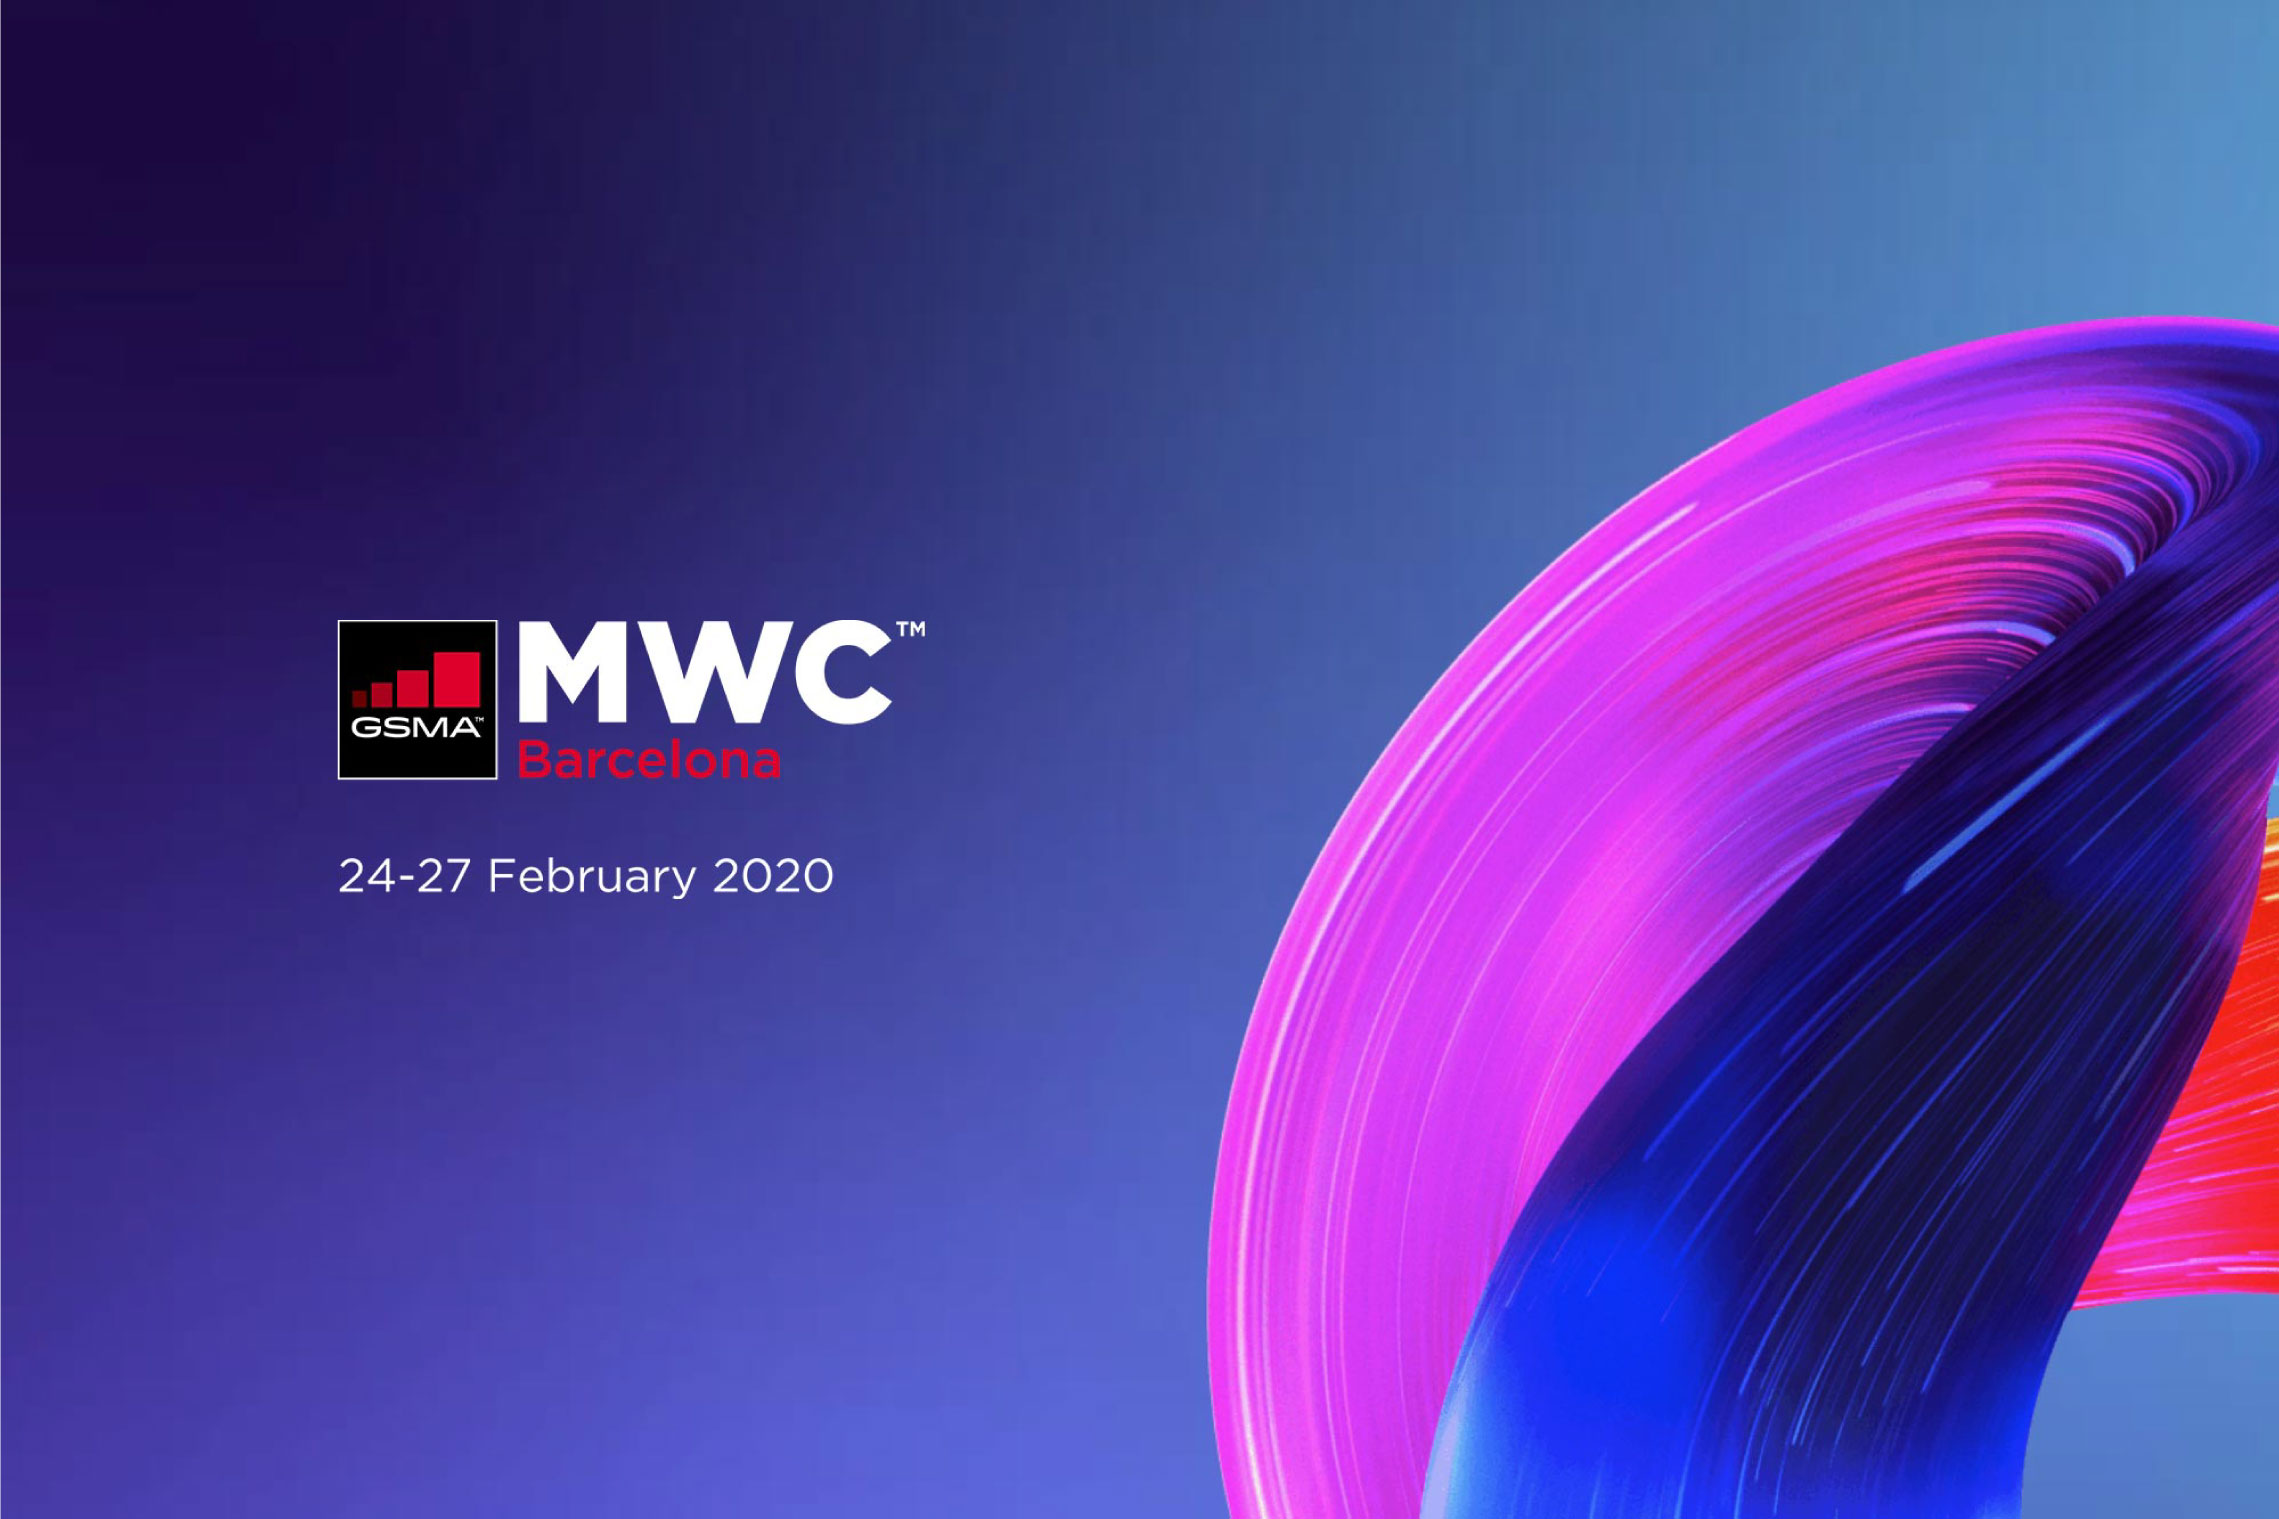 Elevate to be showcased at MWC Barcelona in 2020